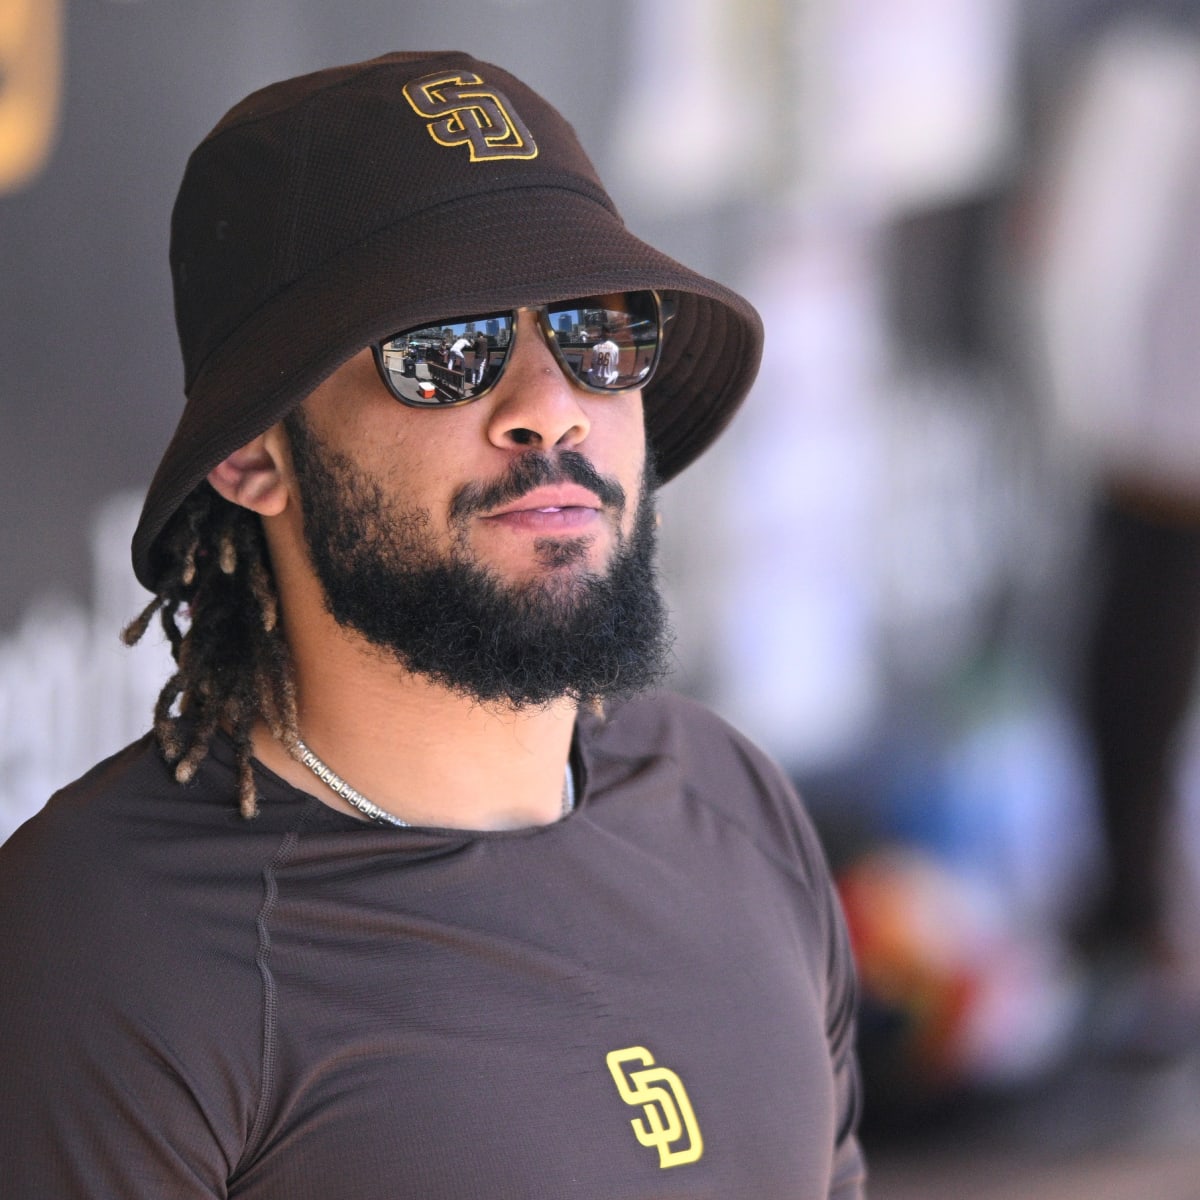 Fernando Tatis Jr. Suspended: Padres SS Caught Using PEDs Faces Up to 80  Games